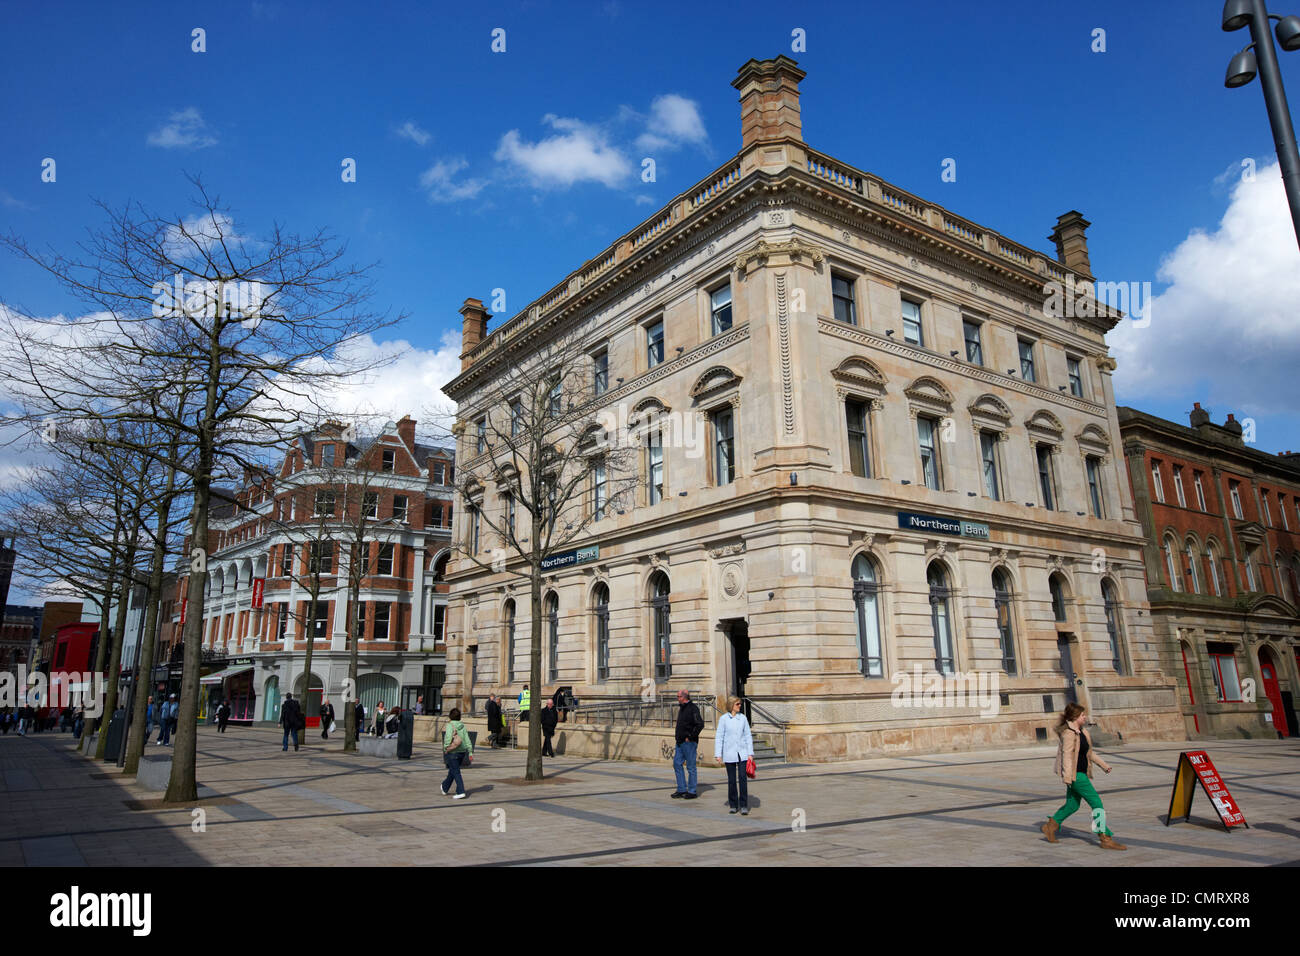 restored northern bank building in shipquay place Derry city county londonderry northern ireland uk. Stock Photo